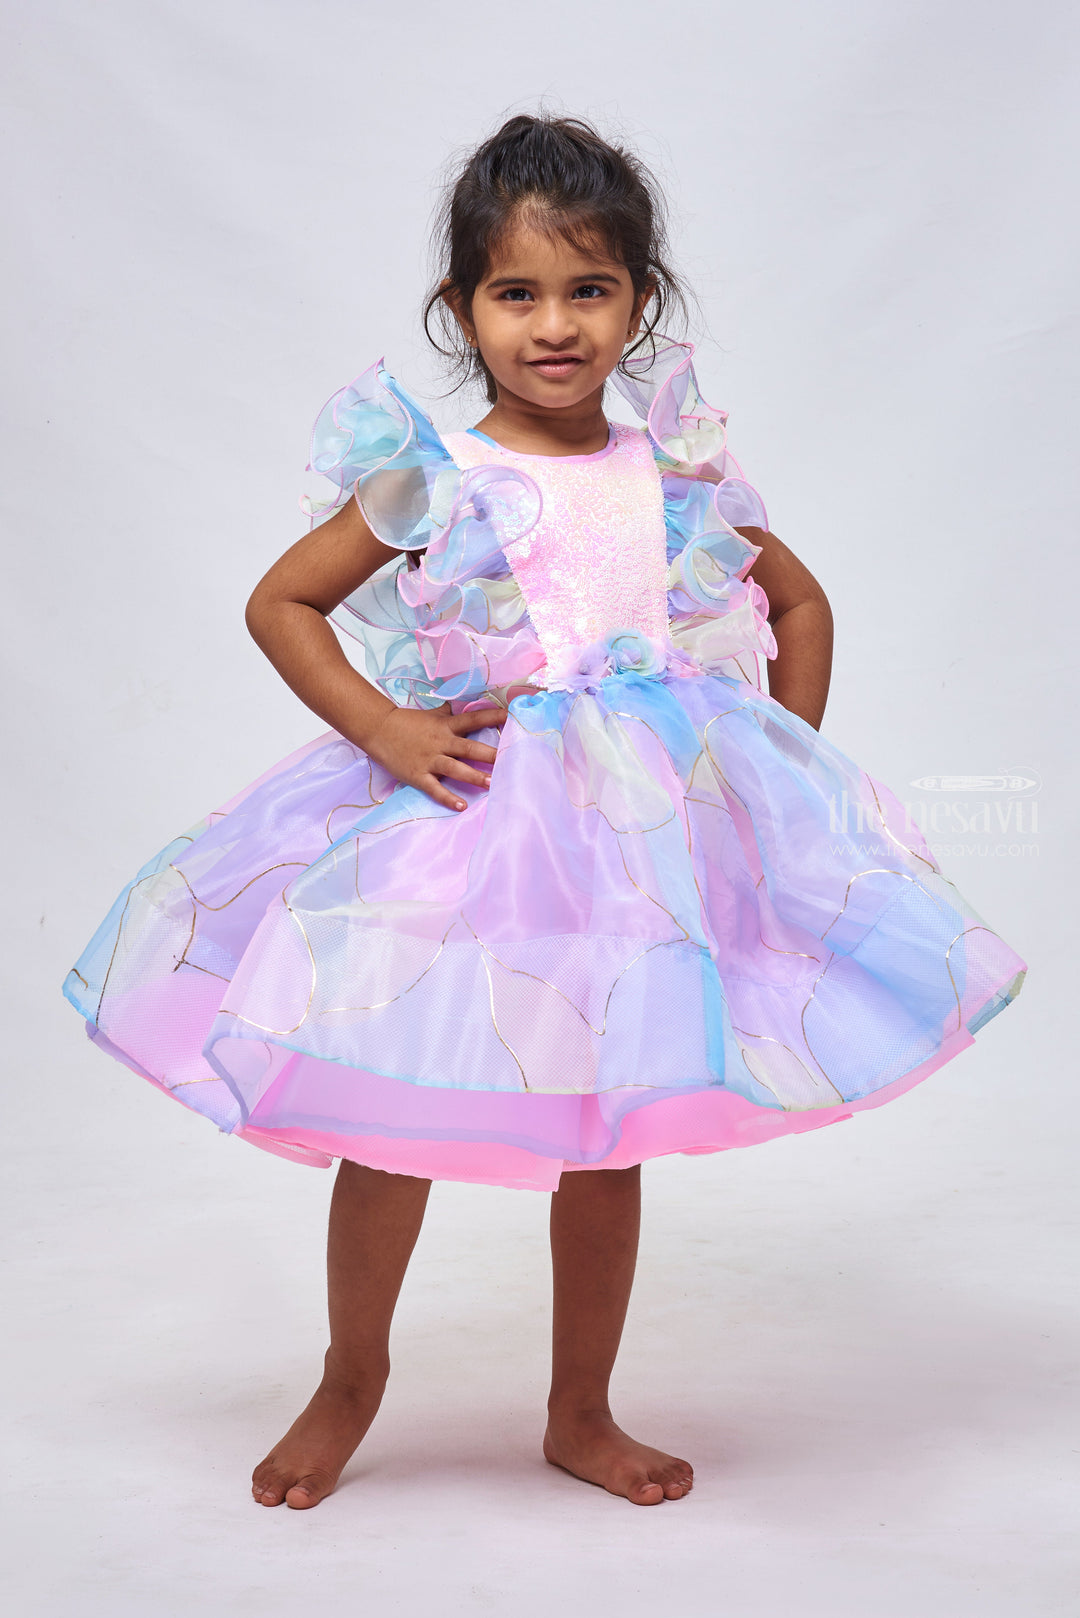 The Nesavu Girls Fancy Party Frock Pink Panache: Ruffled & Sequin Embroidered Organza Party Dress with Delicate Detailing Nesavu 16 (1Y) / Pink / Organza PF147A-16 Stylish Baby Party Wear Gowns | Beautiful Dresses for Little Girls | The Nesavu